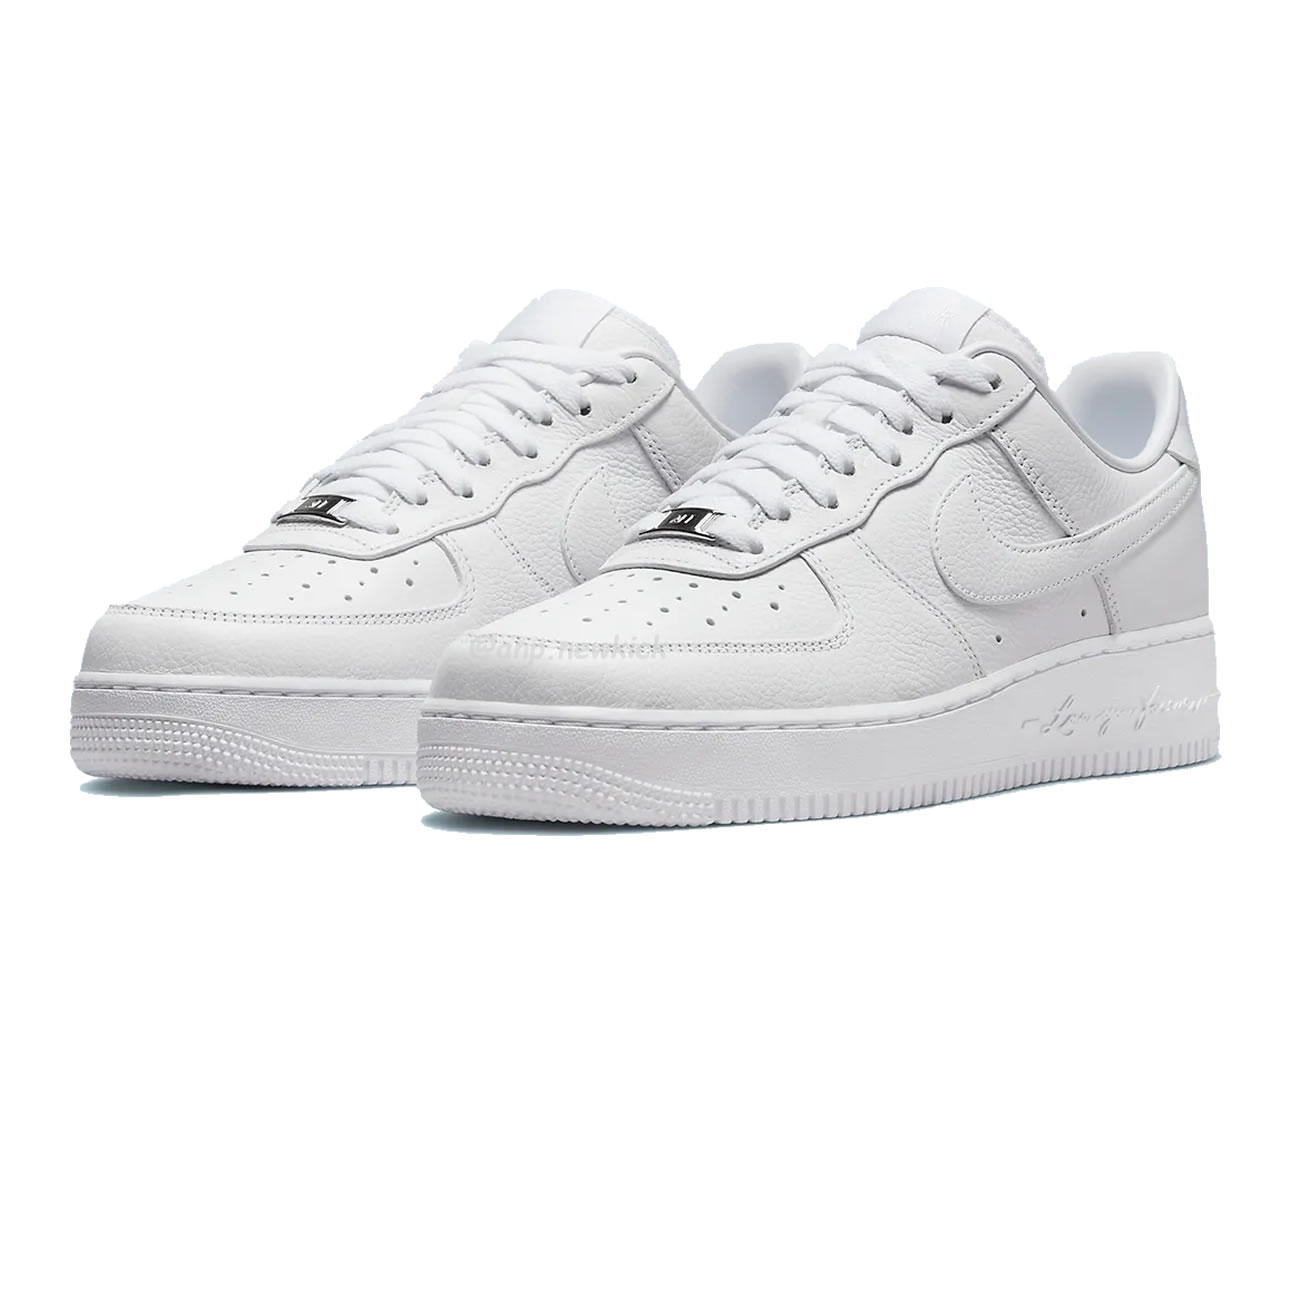 Nike Air Force 1 Low Drake Nocta Certified Lover Boy Cz8065 100 (2) - newkick.org